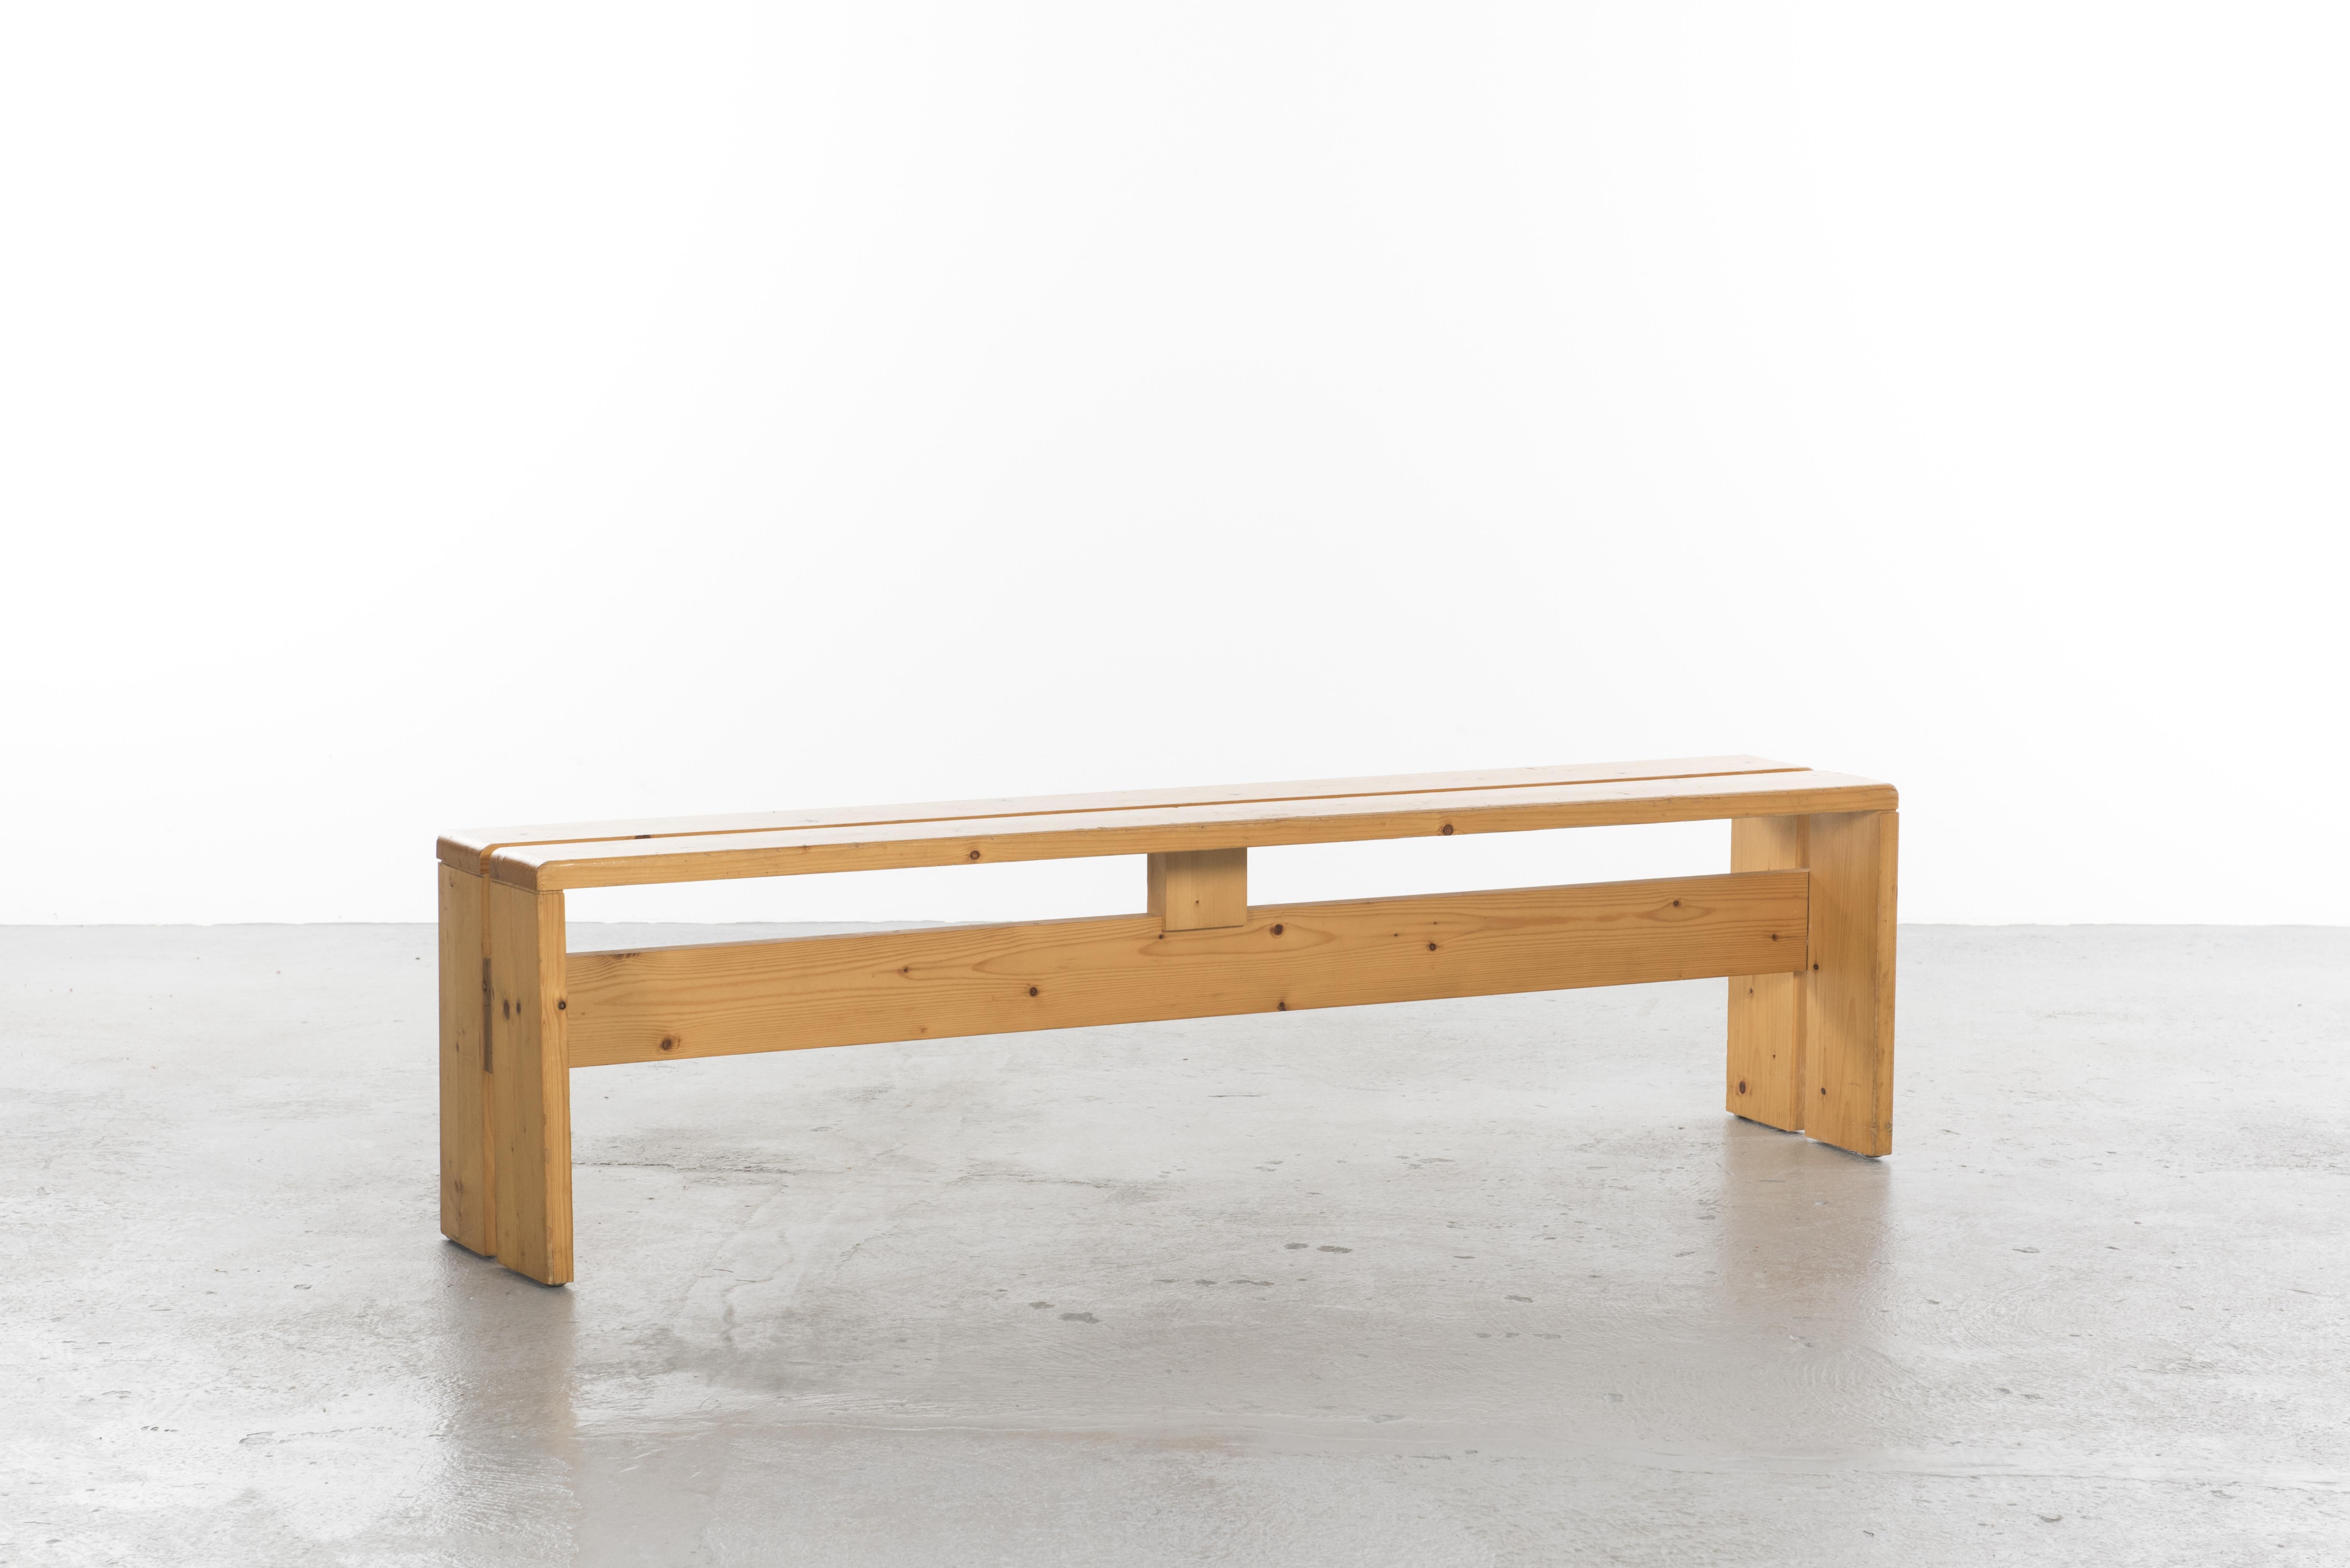 Bench from Ski Resort Les Arcs by Charlotte Perriand 1